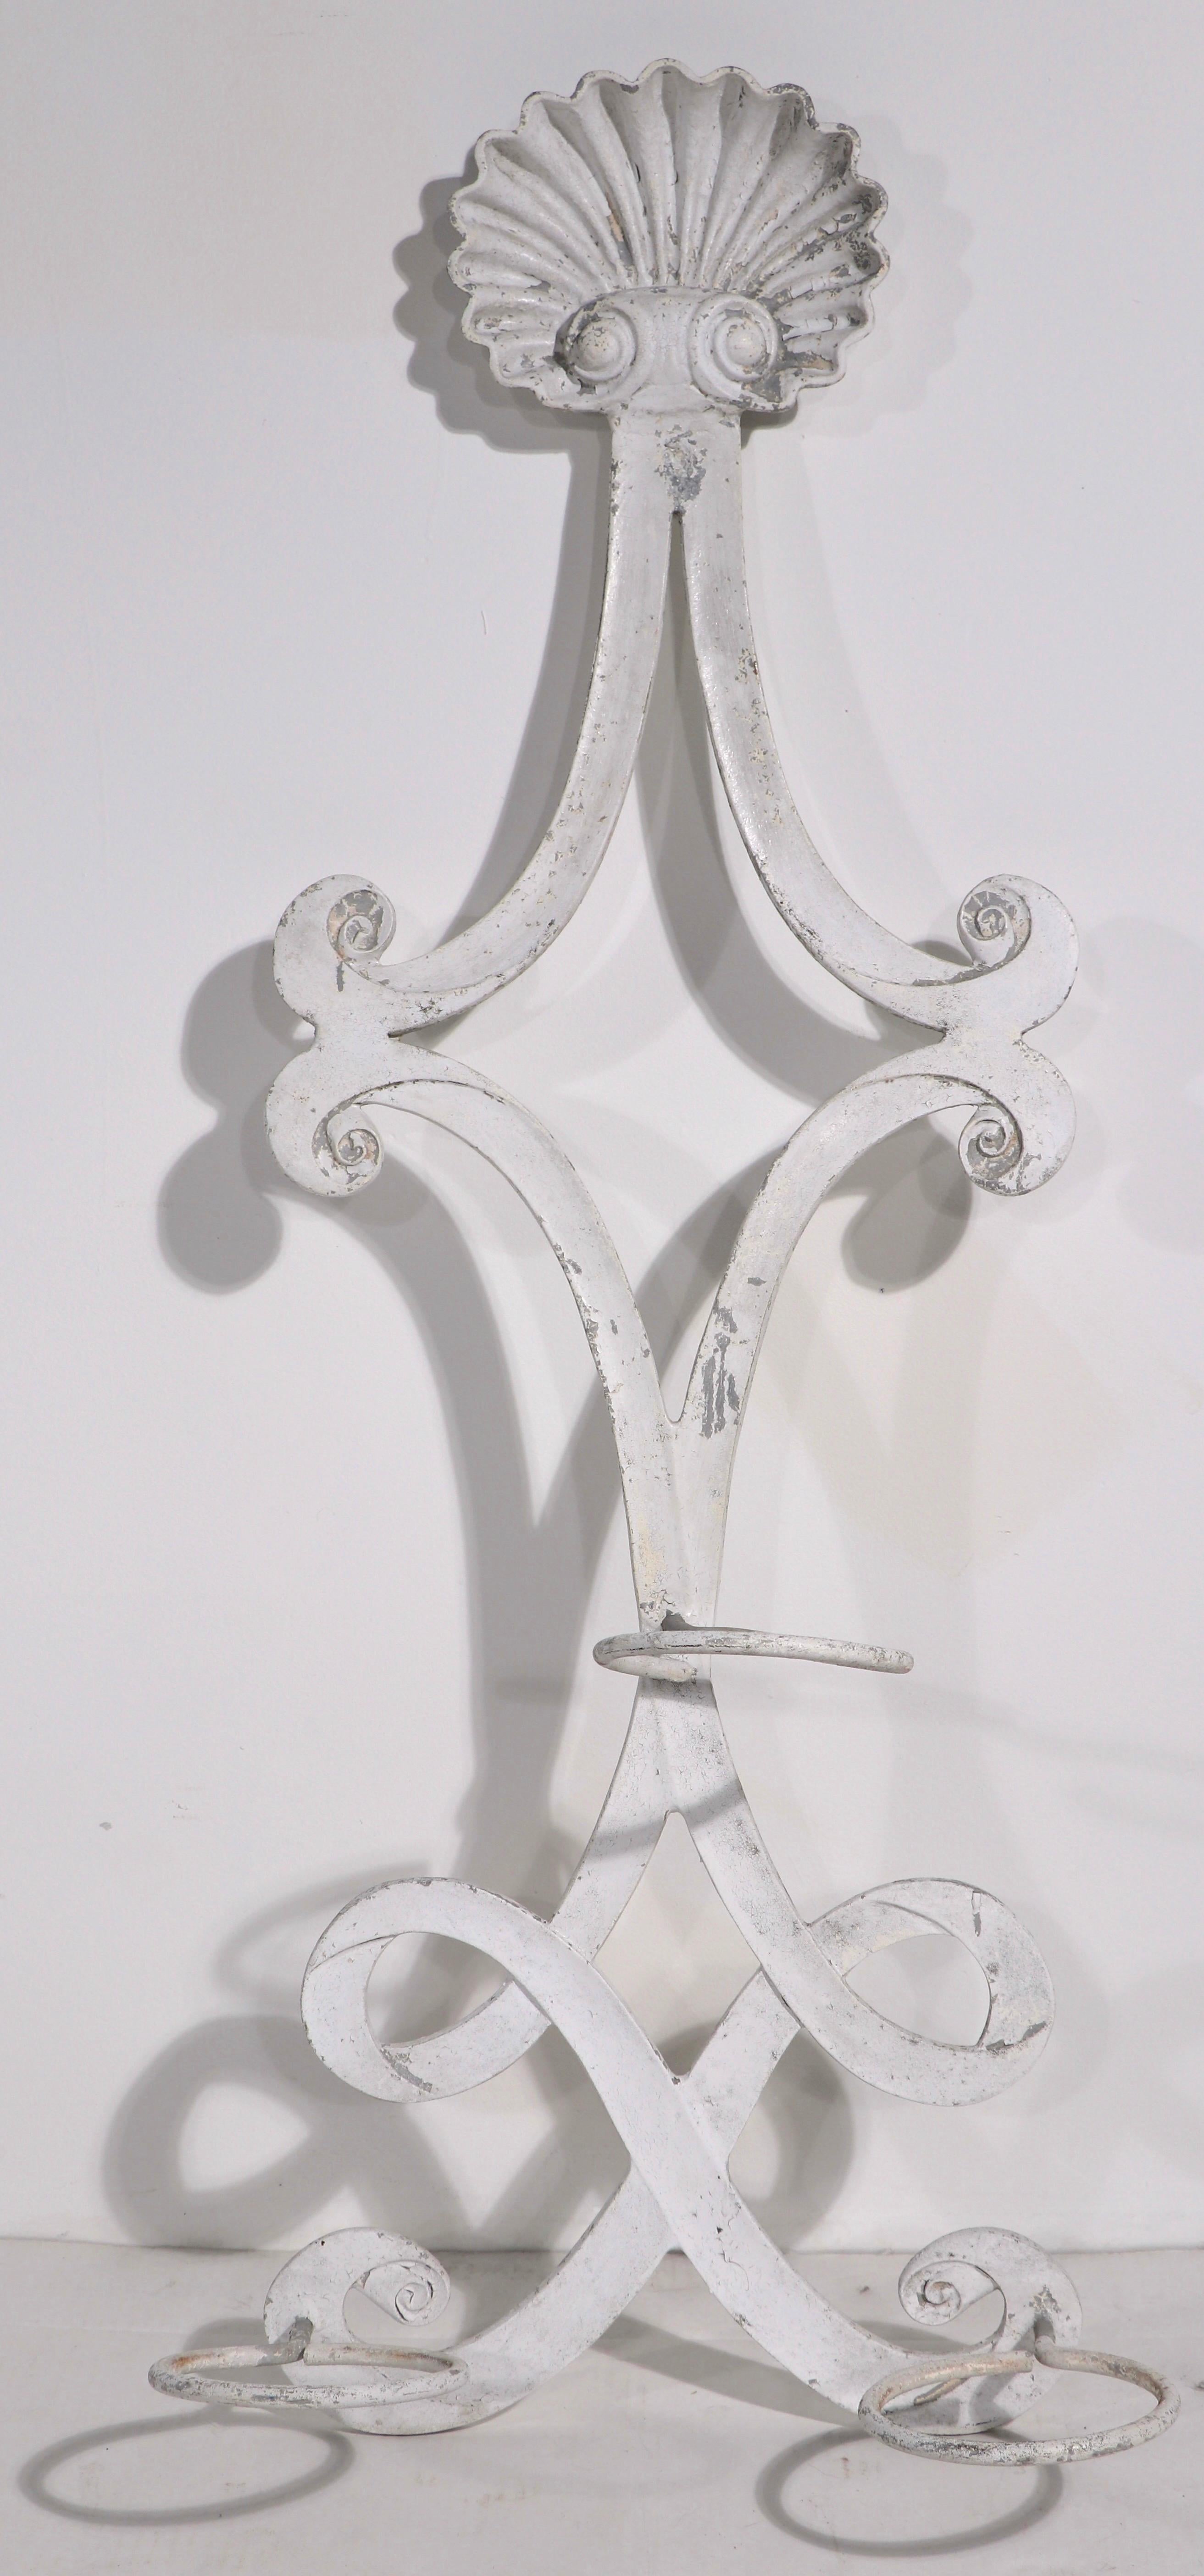 Unusual wall mount planter in cast aluminum, attributed to Molla. Scroll form body with shell top, having three planter rings, each ring 5.5 inch diameter. Elegant Art Deco design, good original condition, no structural damage, cosmetic wear to